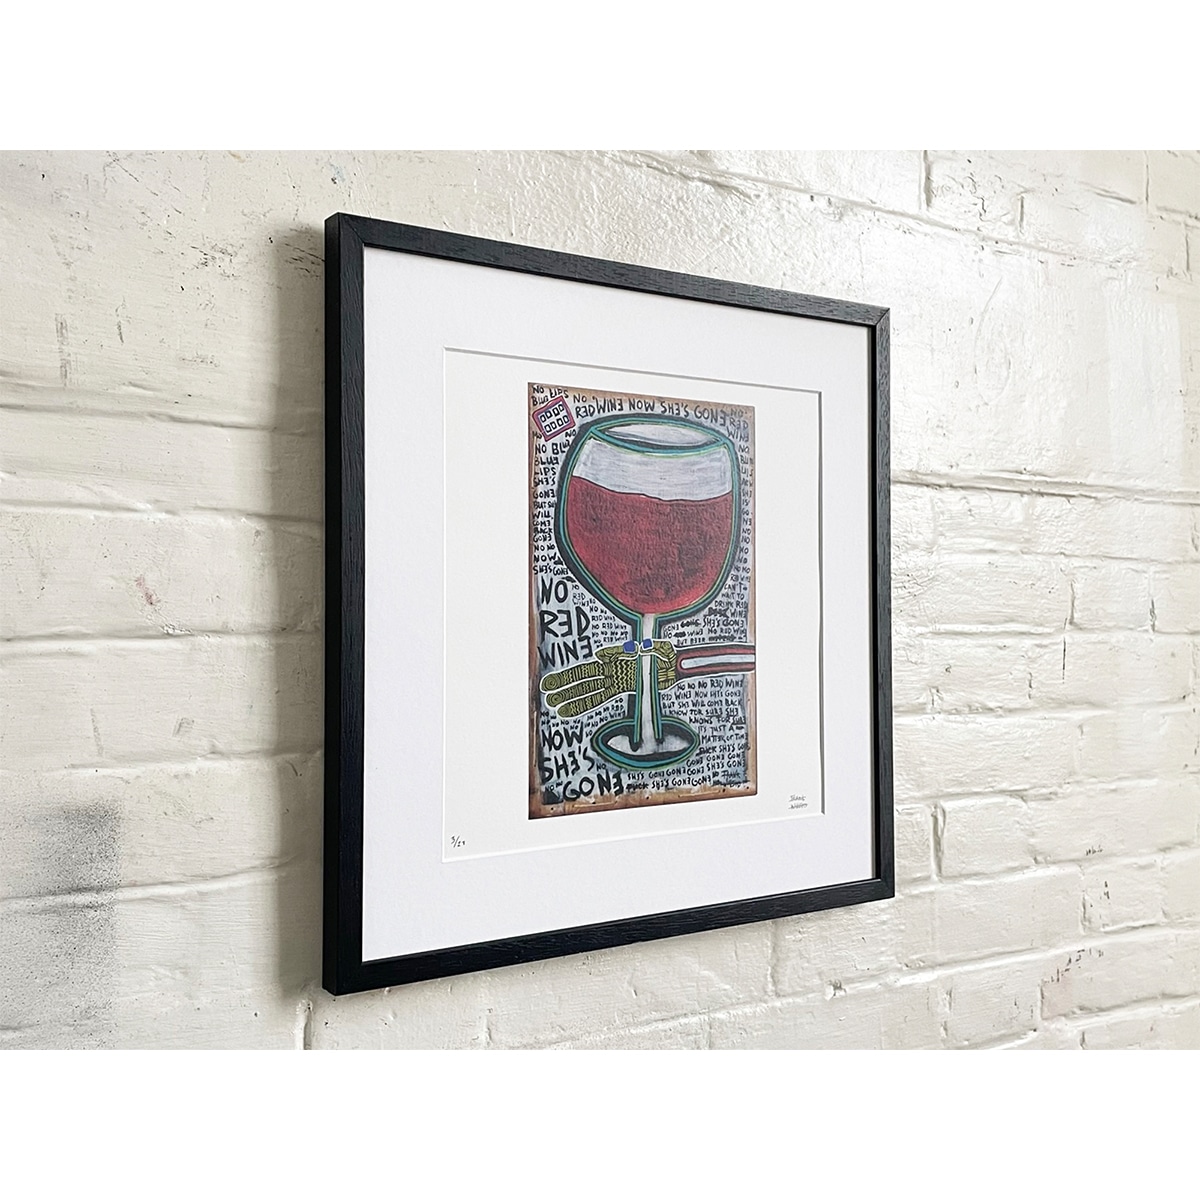 Limited Edt. Art Print – NO RED WINE NOW SHE’S GONE